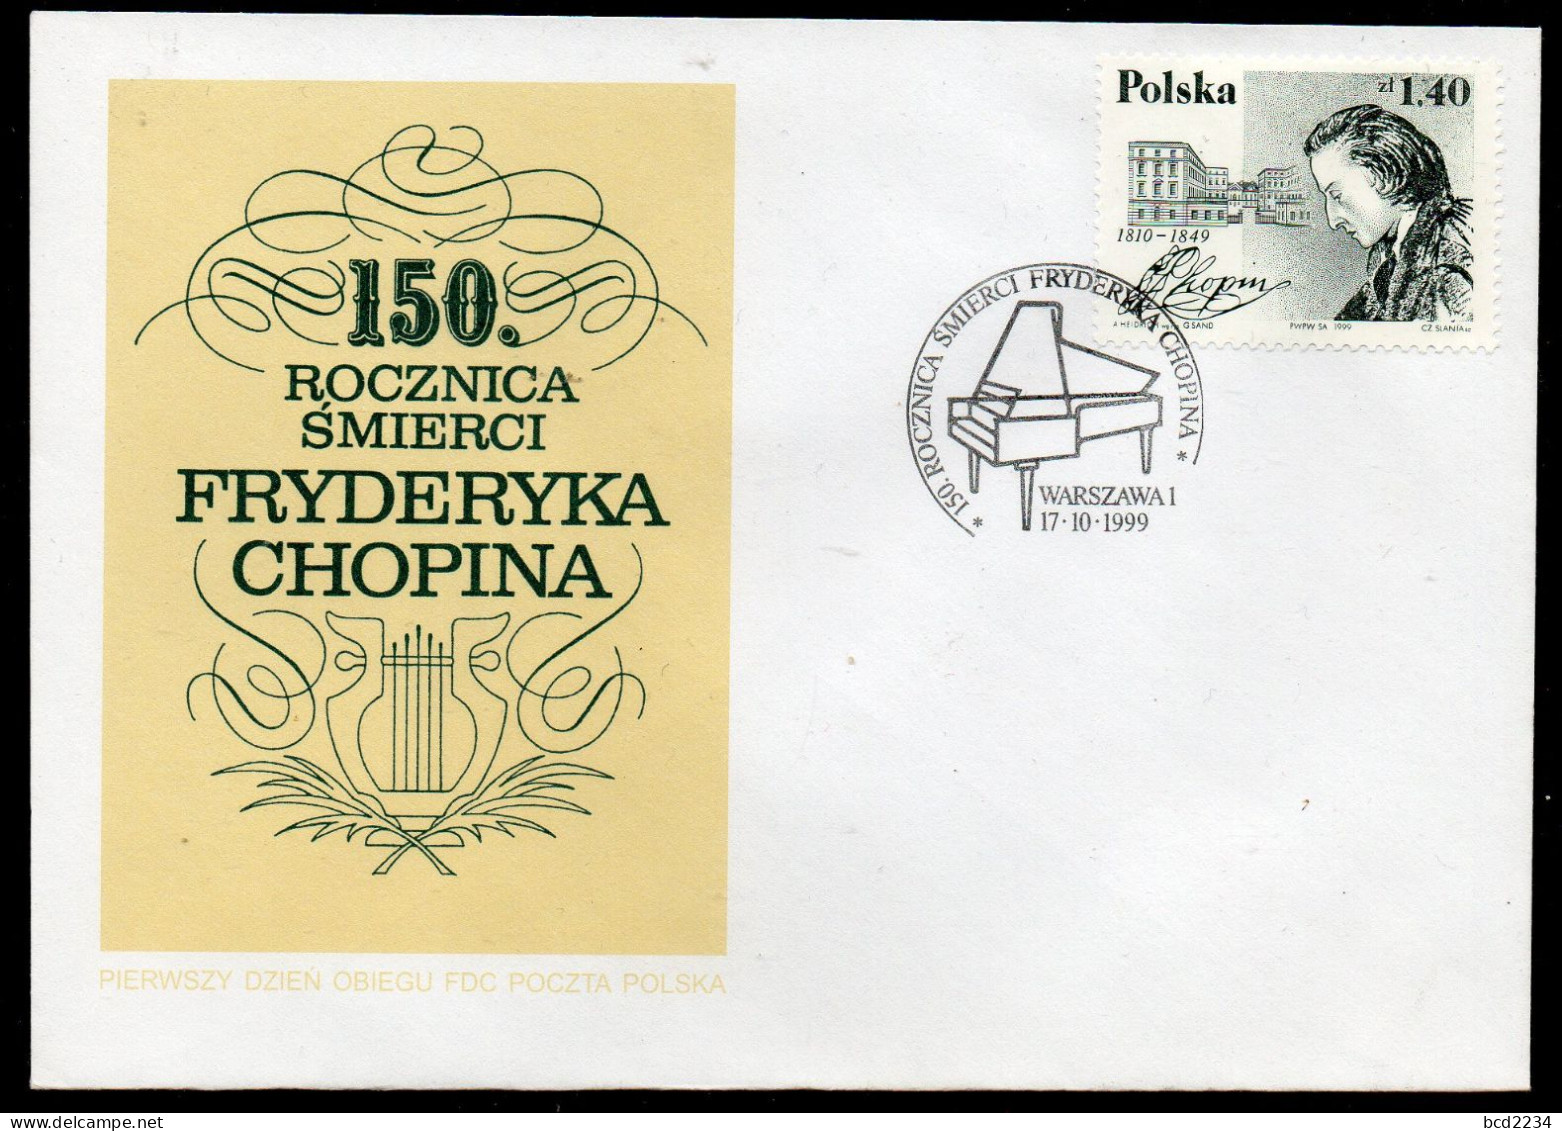 POLAND FRANCE SLANIA 1999 CHOPIN JOINT ISSUE FDC 150TH DEATH ANNIVERSARY COMPOSERS MUSIC PIANO POLISH FRENCH - FDC